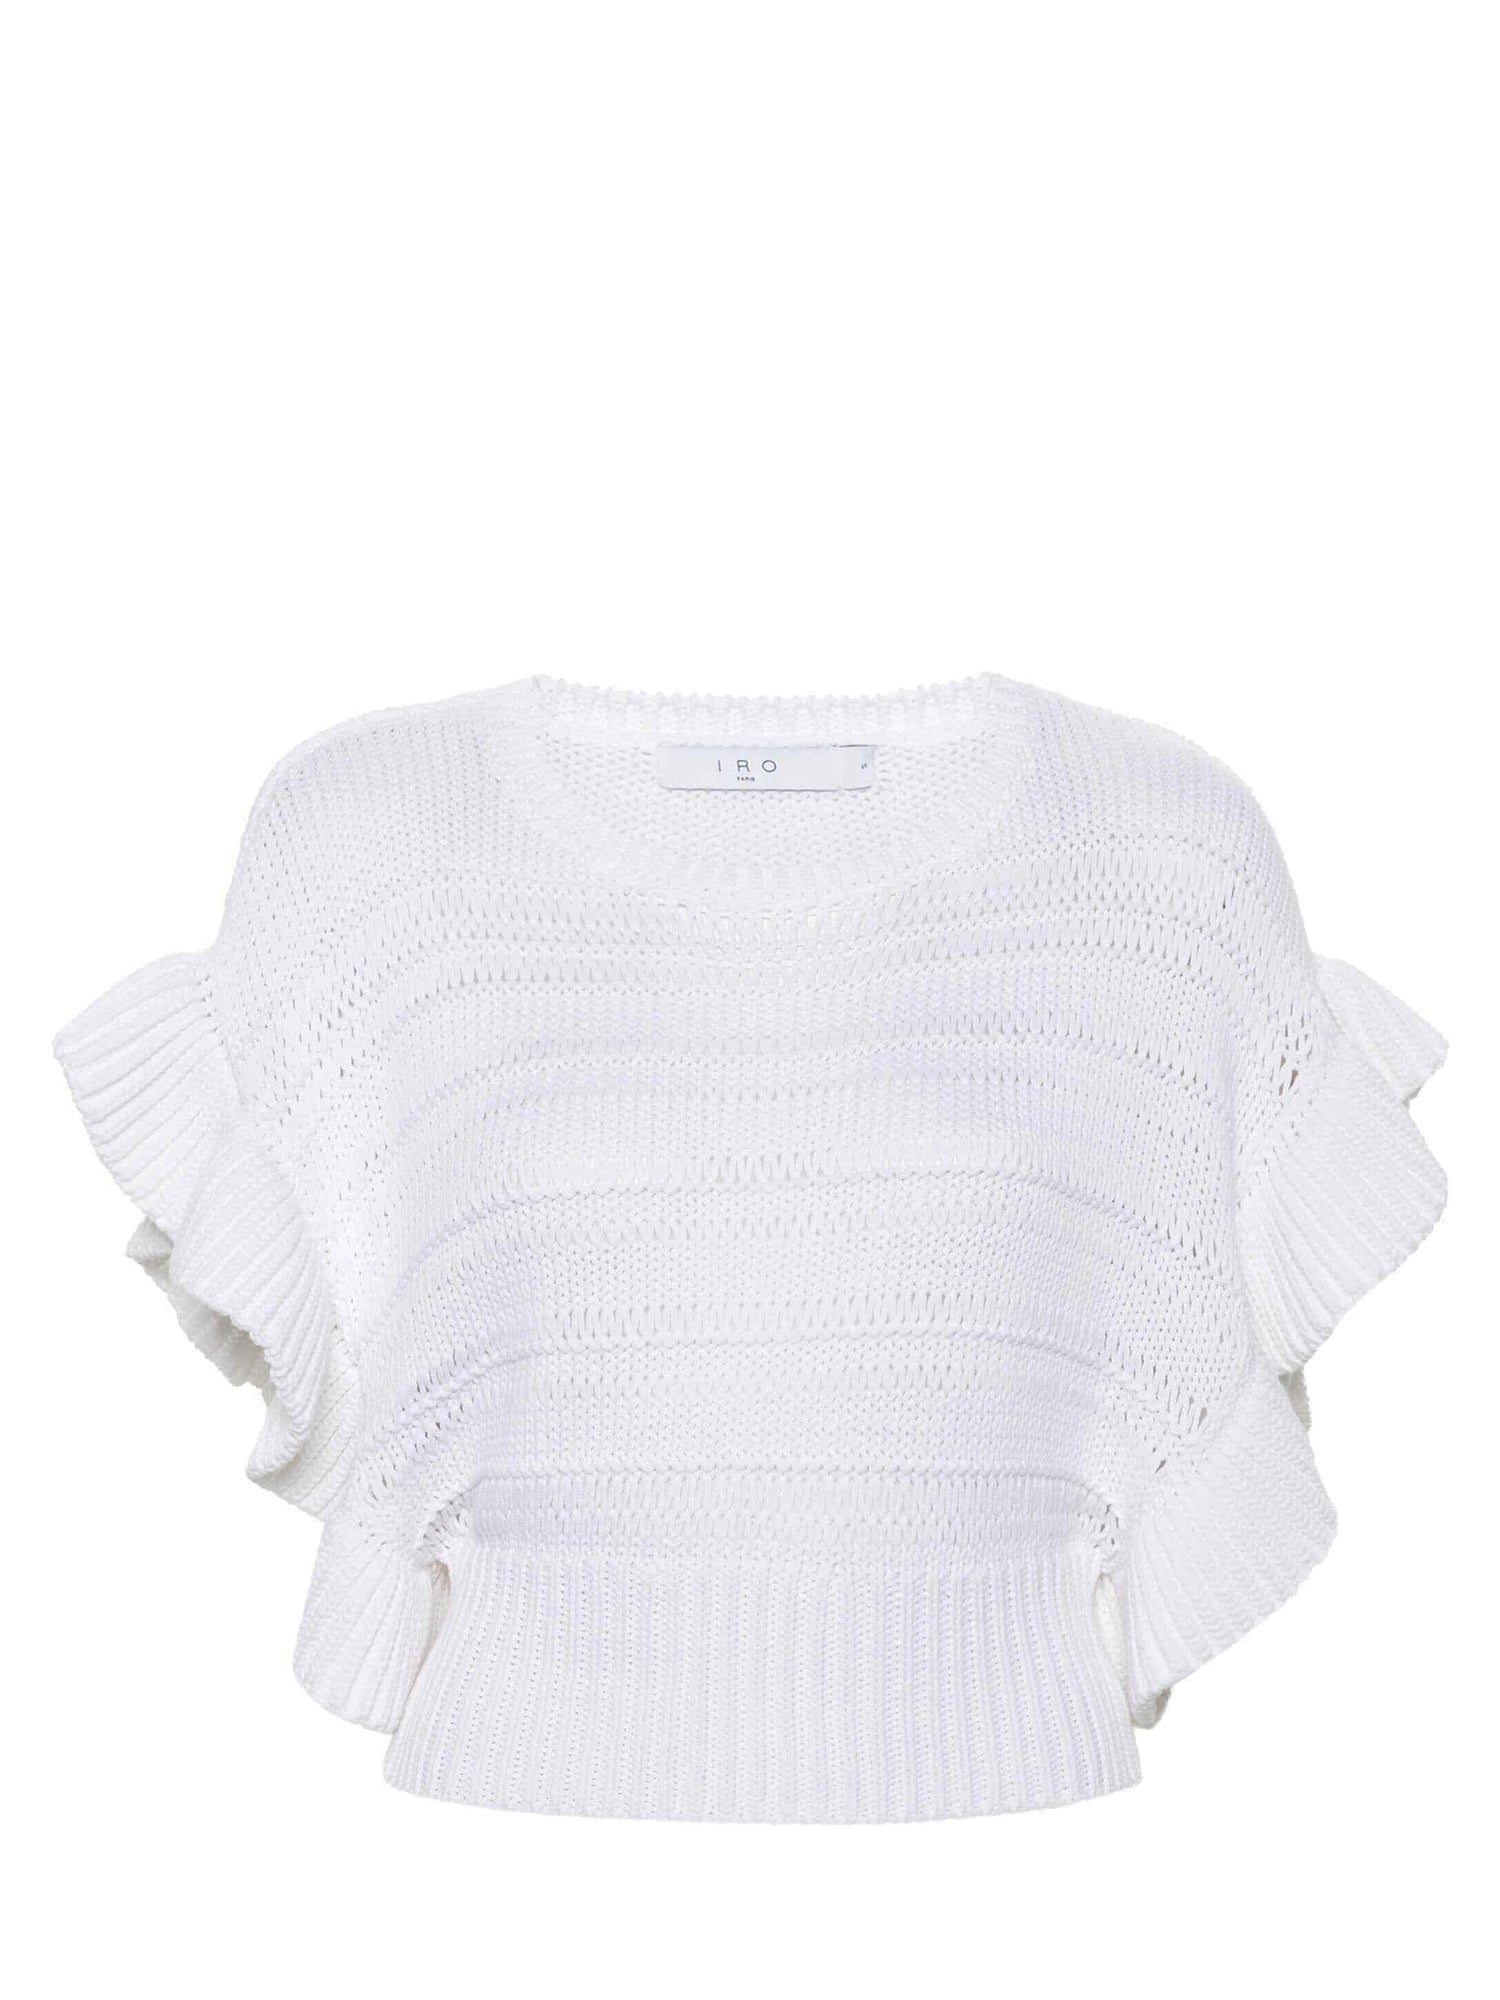 OUZNA knitted top, white